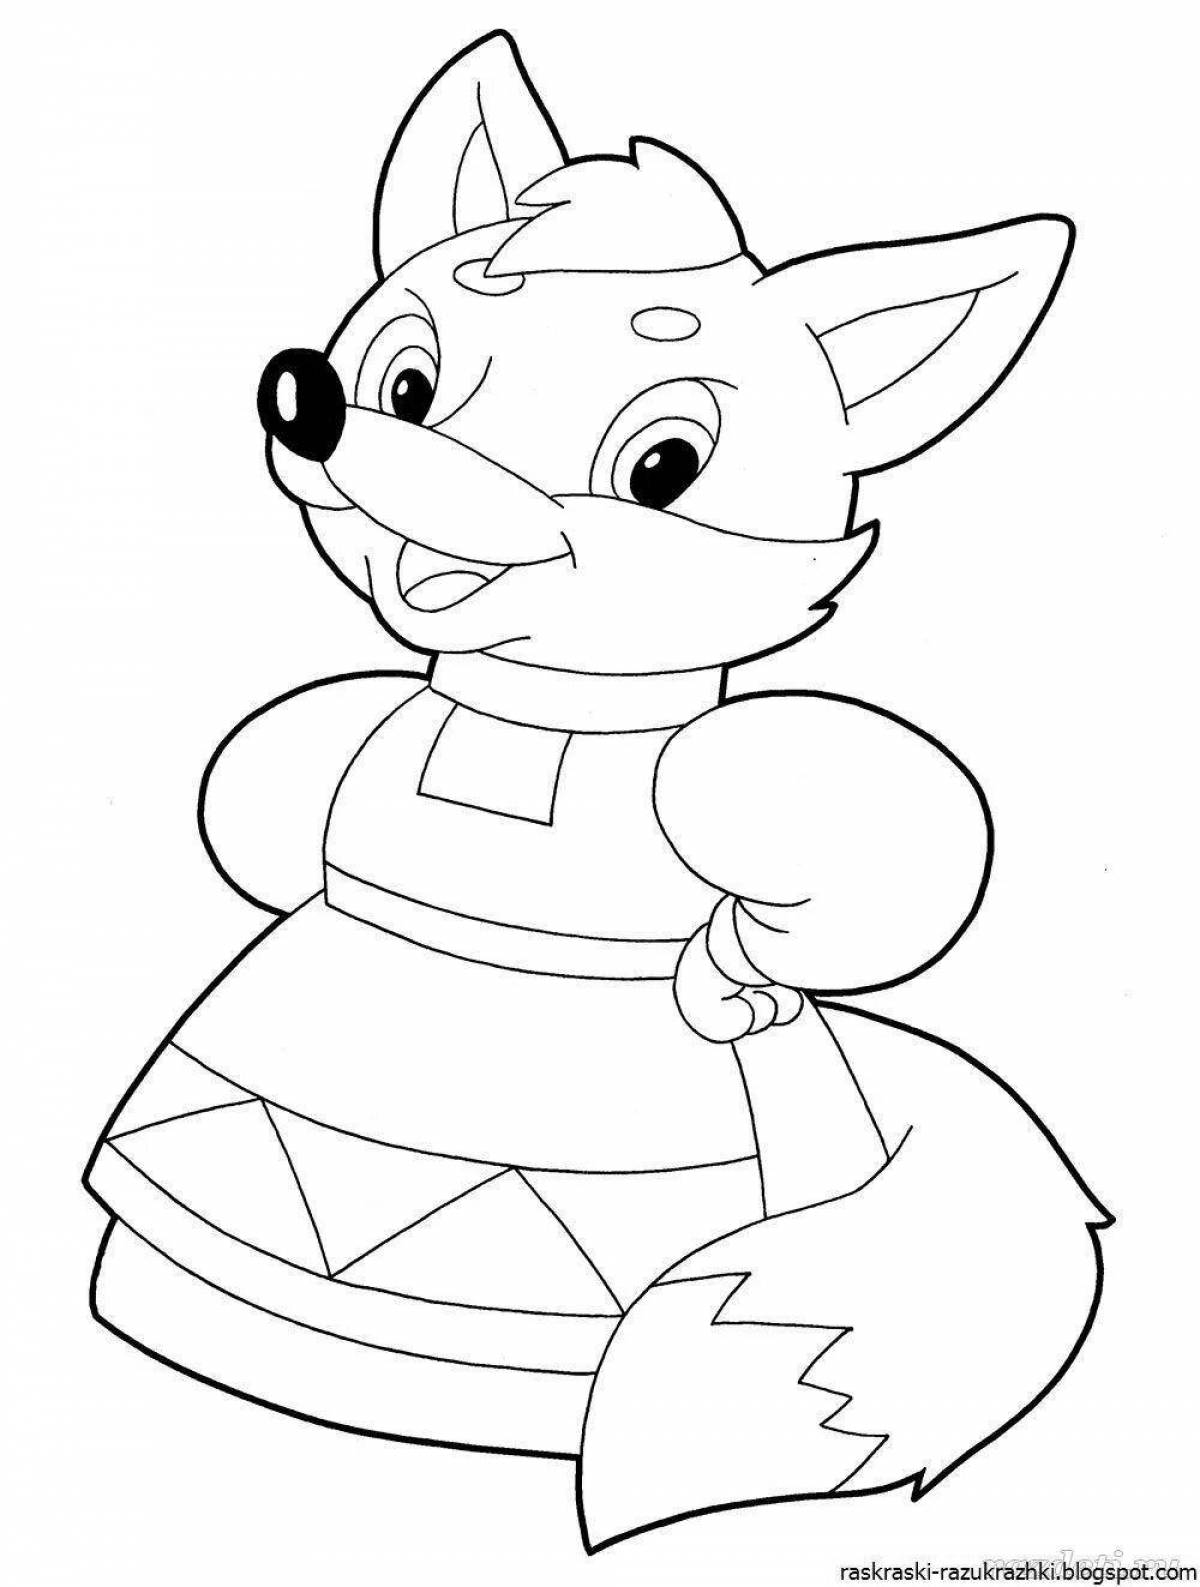 Whimsical fox coloring book for 2-3 year olds